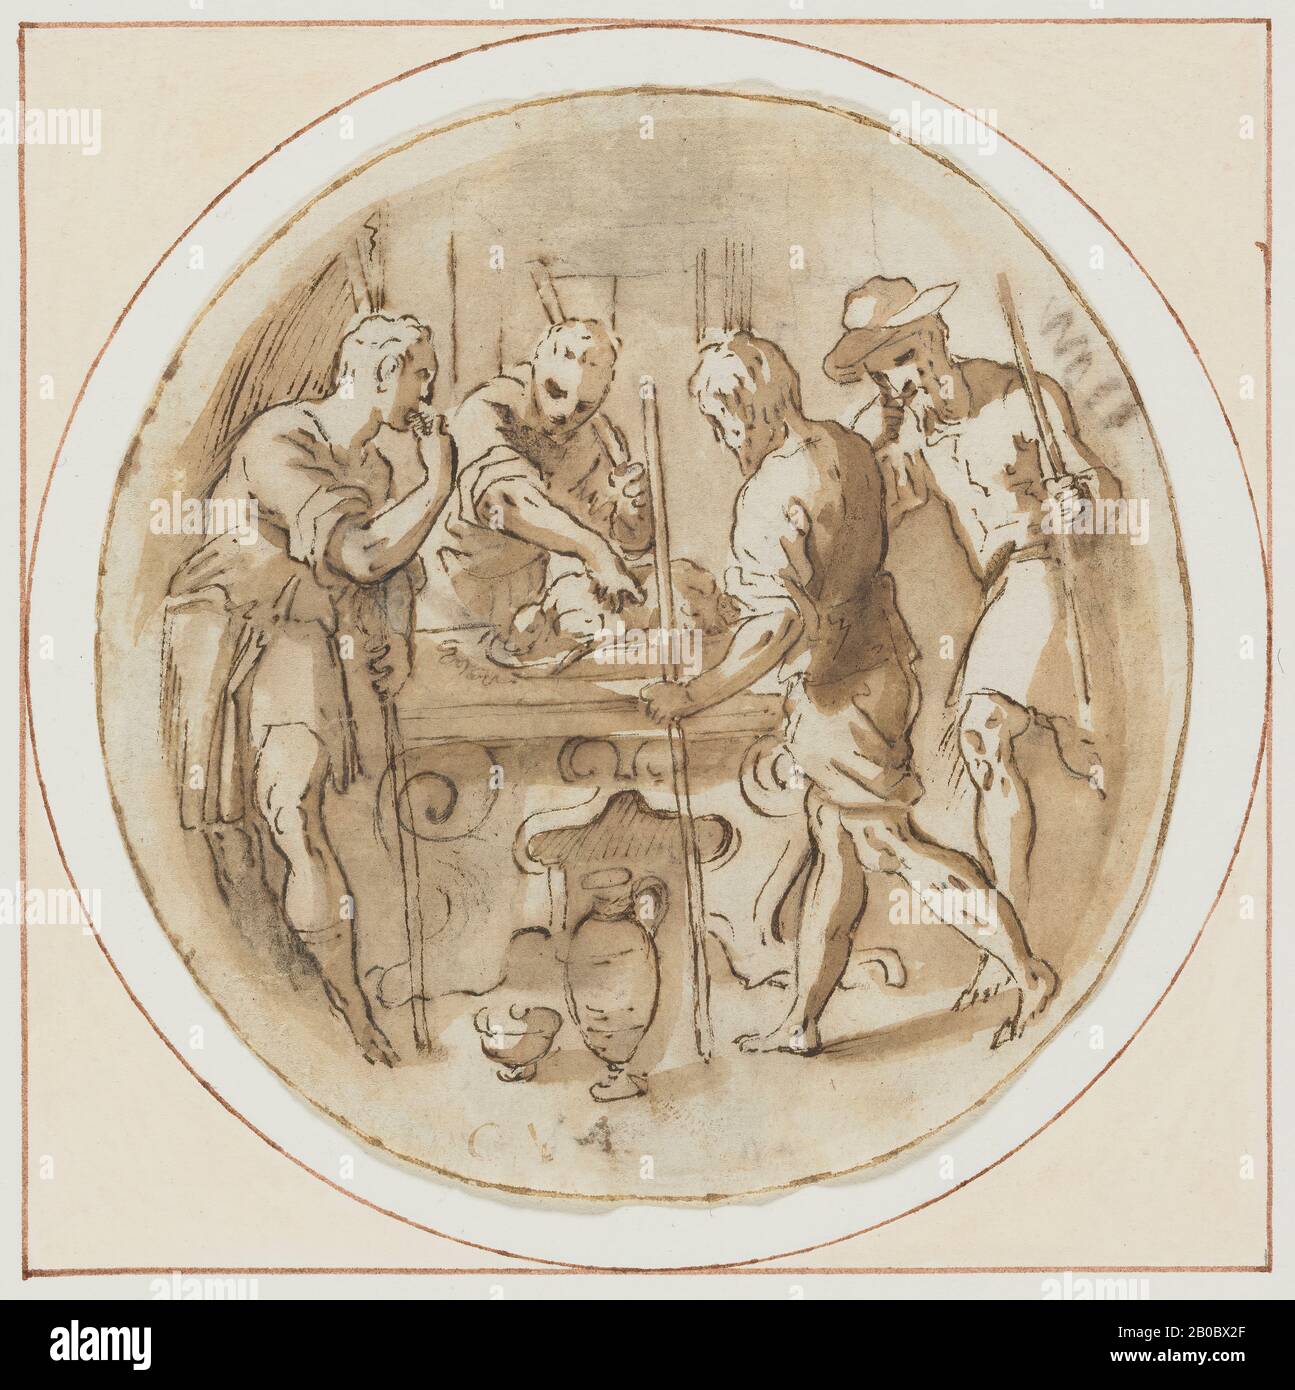 Jacopo Palma il giovane, The Feast of the Passover, 1548-1628, pen and brown ink and brown wash over black chalk on paper, 4 3/16 in. (10.7 cm.) Stock Photo